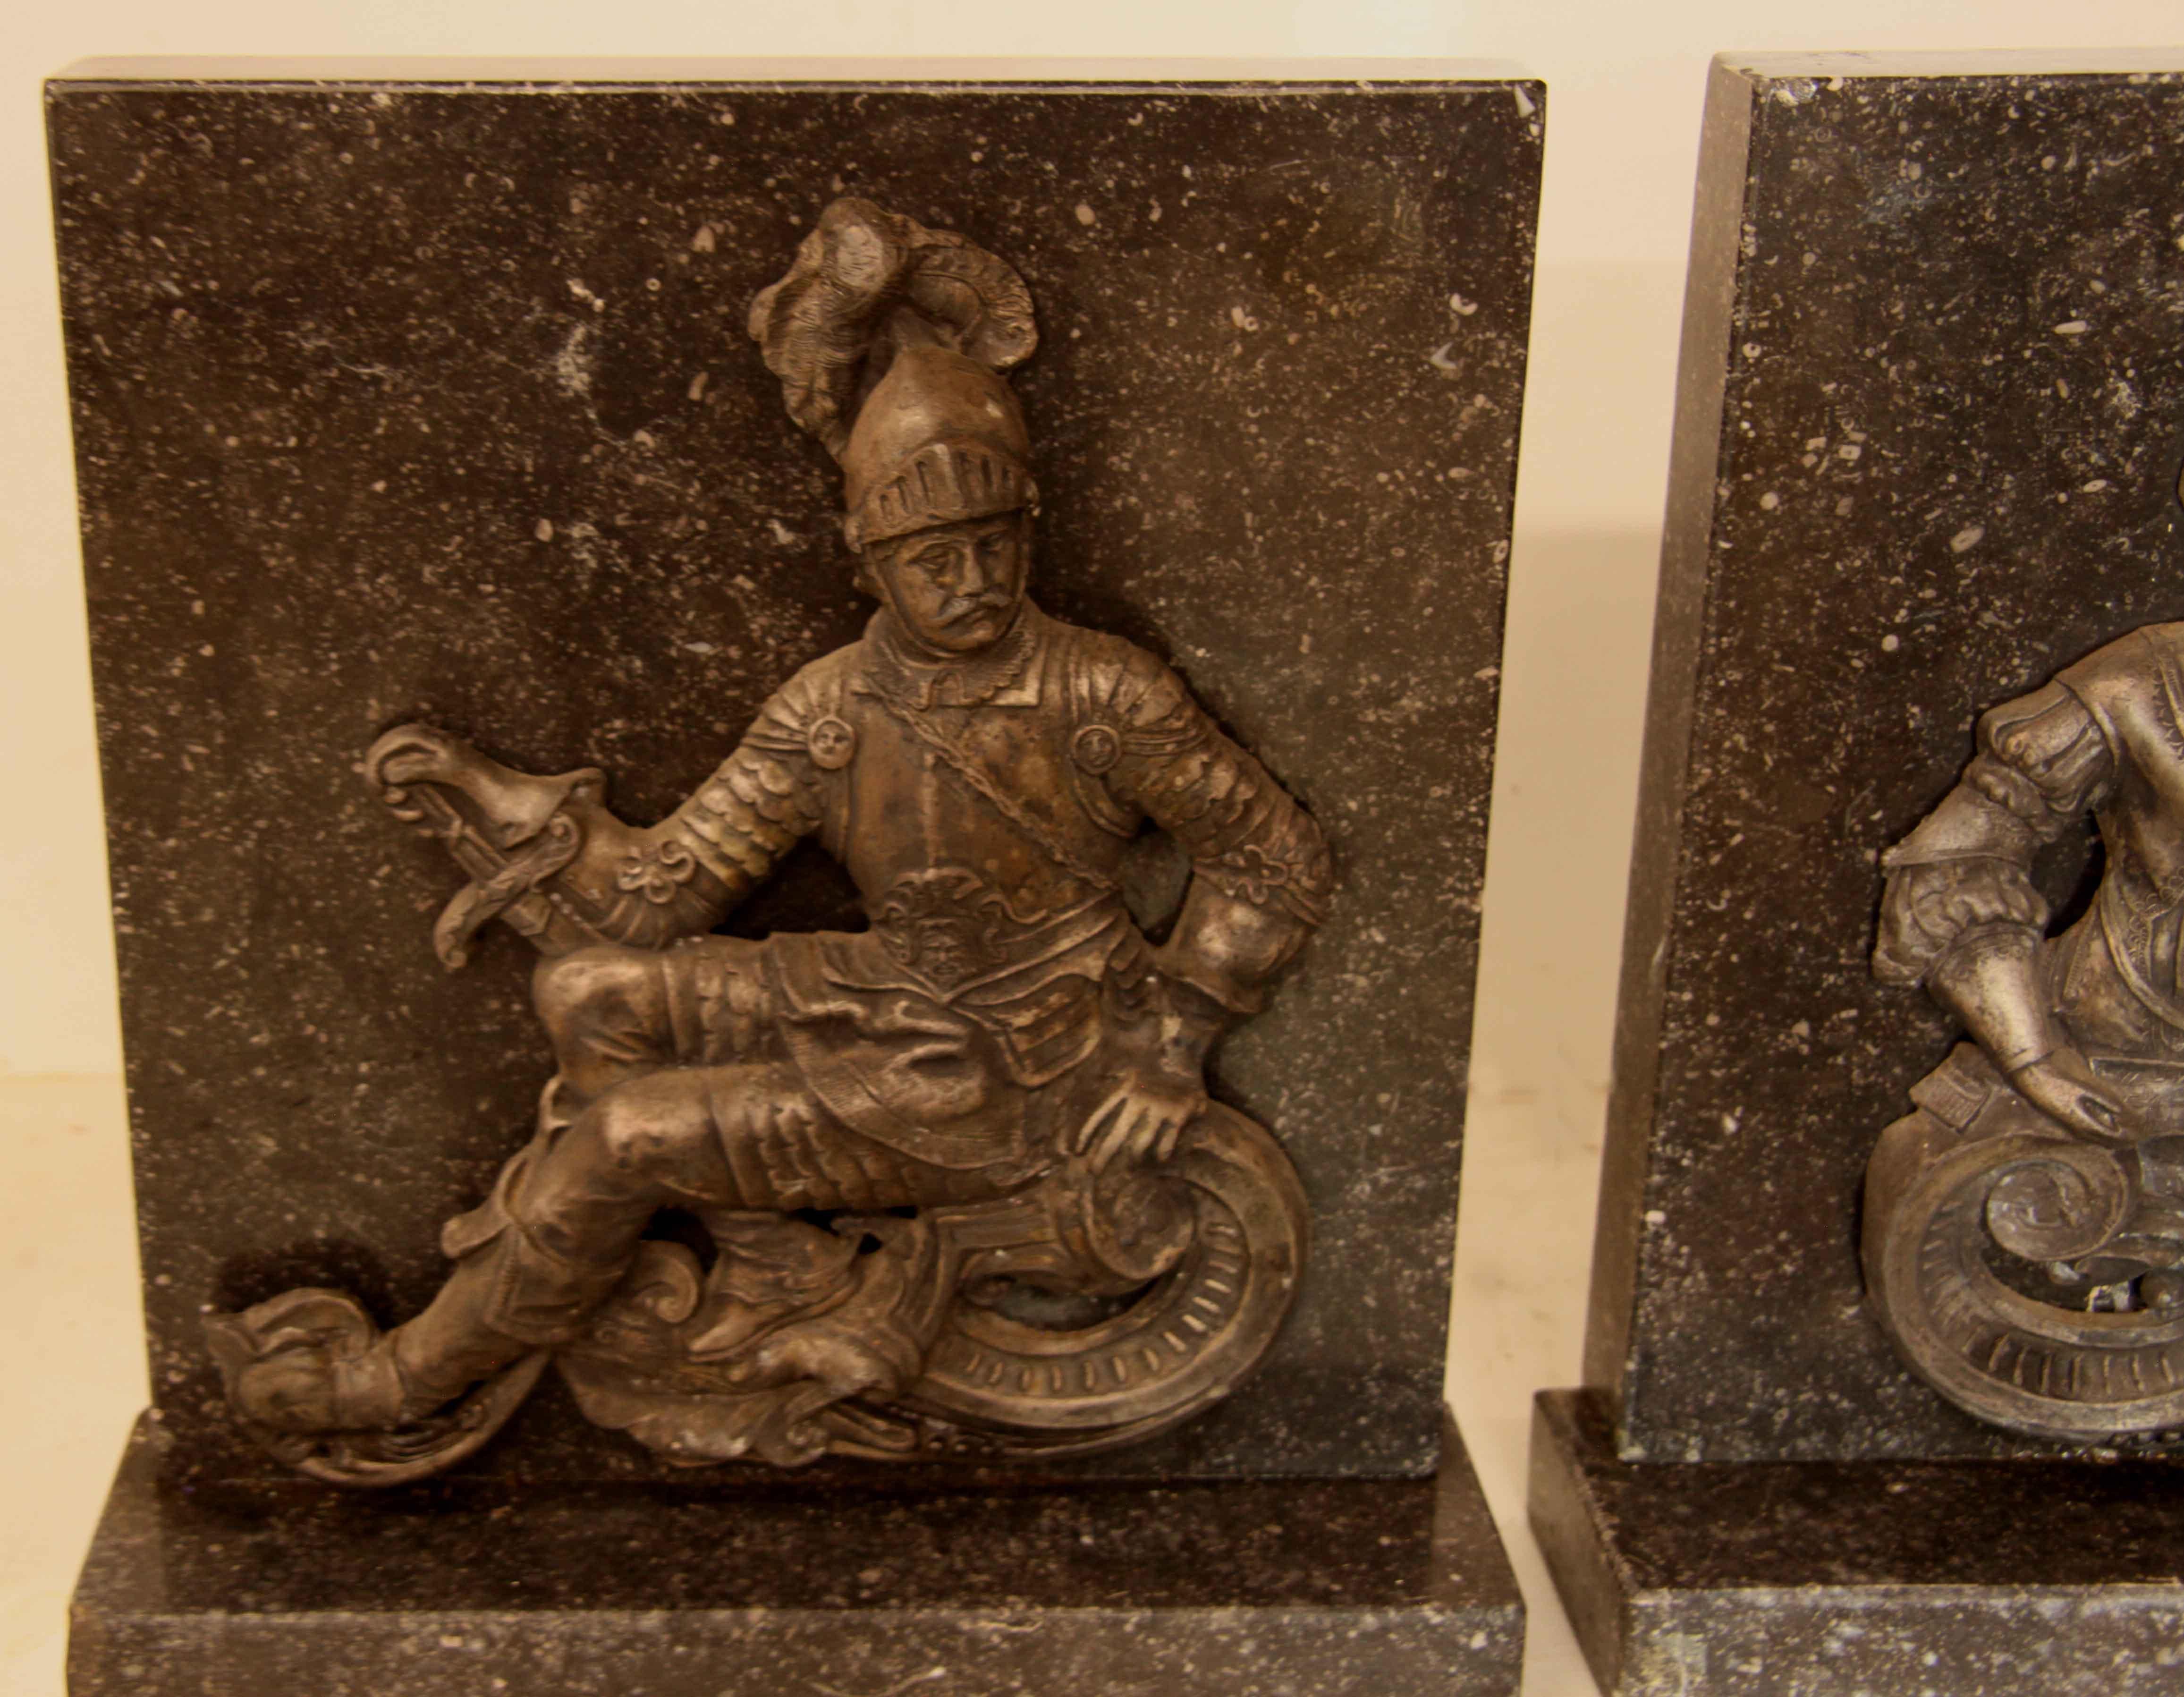 Pair of granite and spelter figurative book ends, one of a French soldier with sword, the other a lady posing with string instrument.  This pair could also serve as decorative objects in the home (on a mantle would be ideal.)  Each one weighs 40